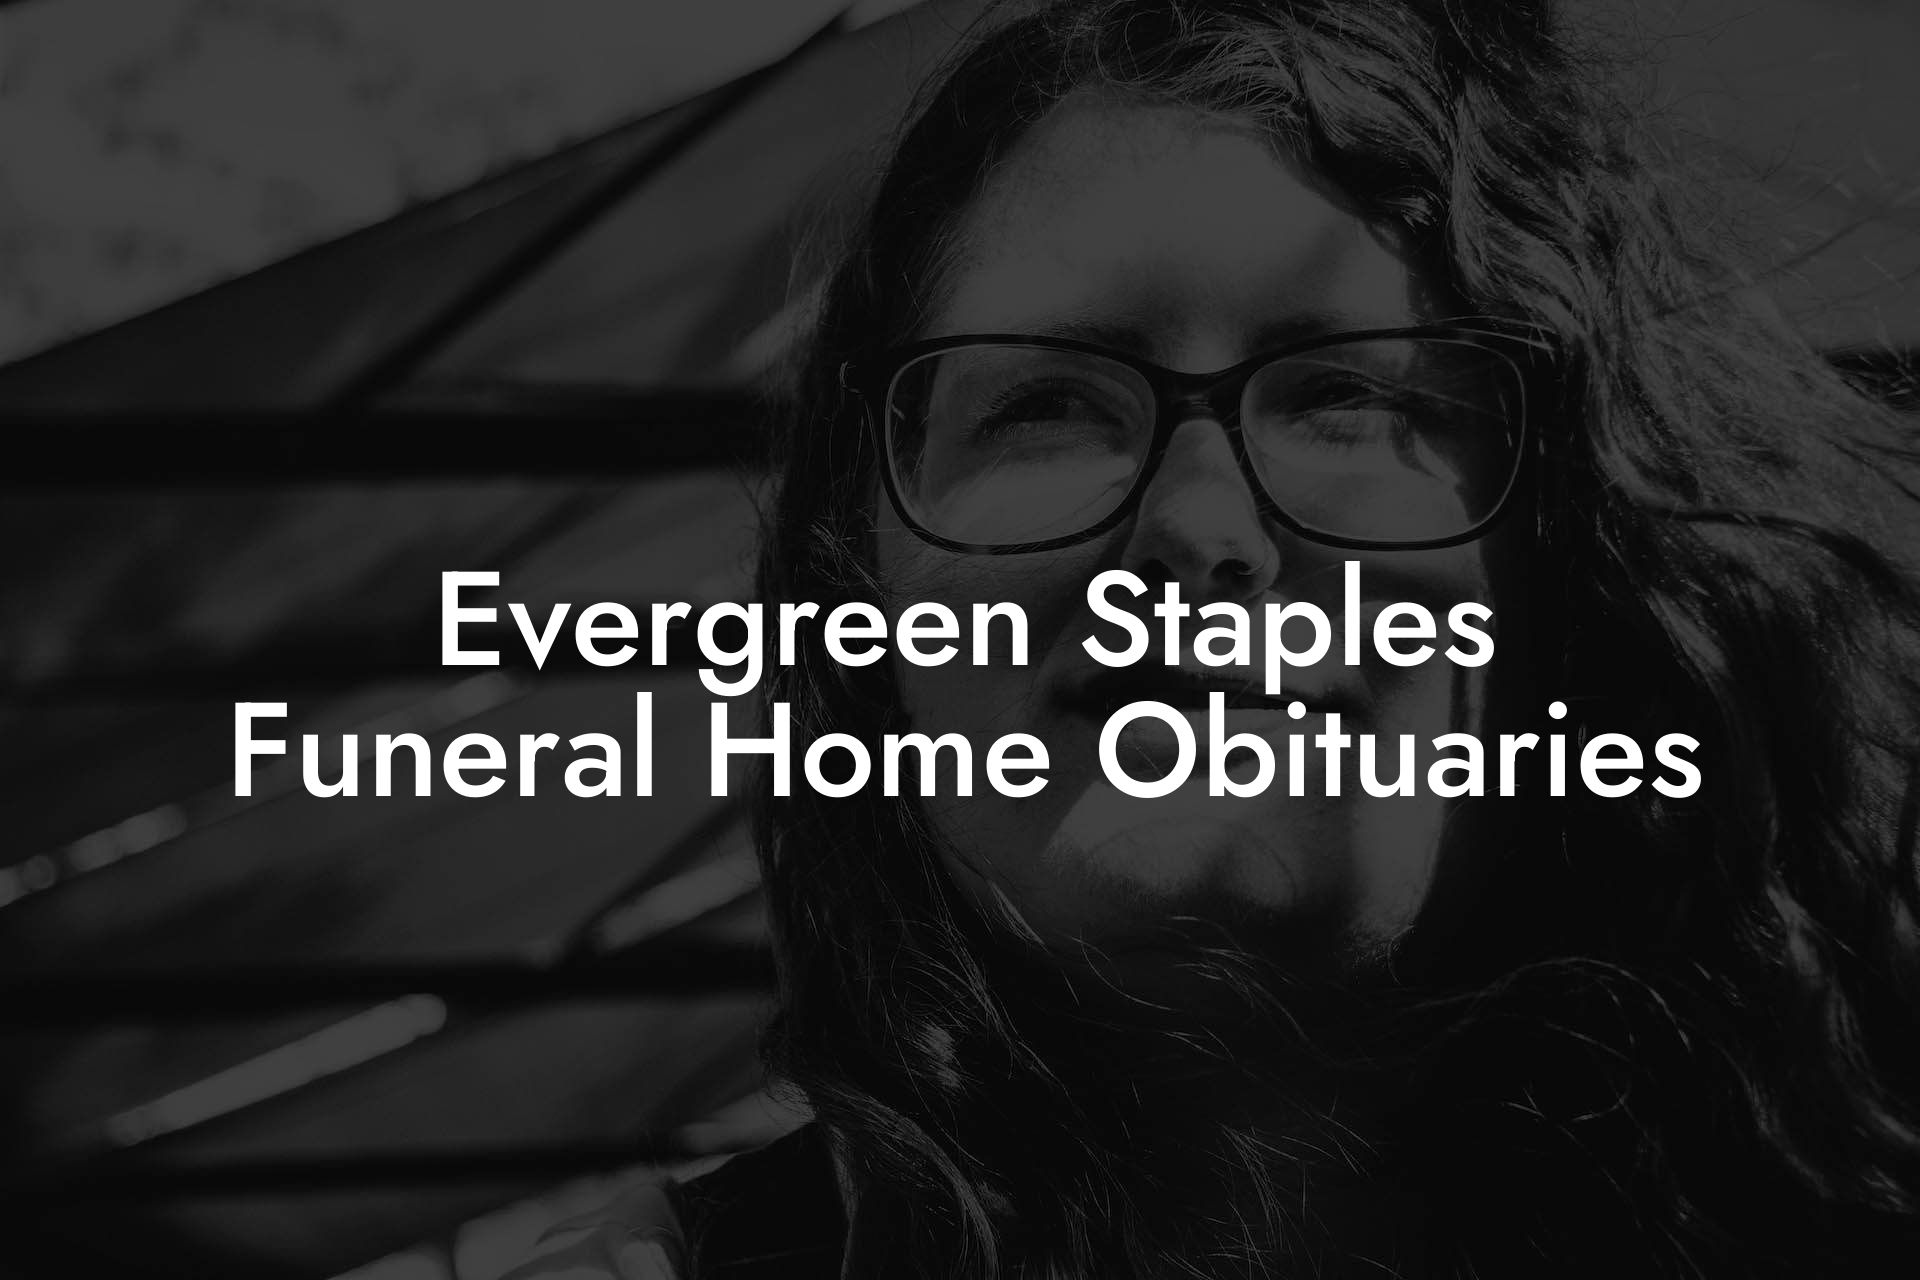 Evergreen Staples Funeral Home Obituaries